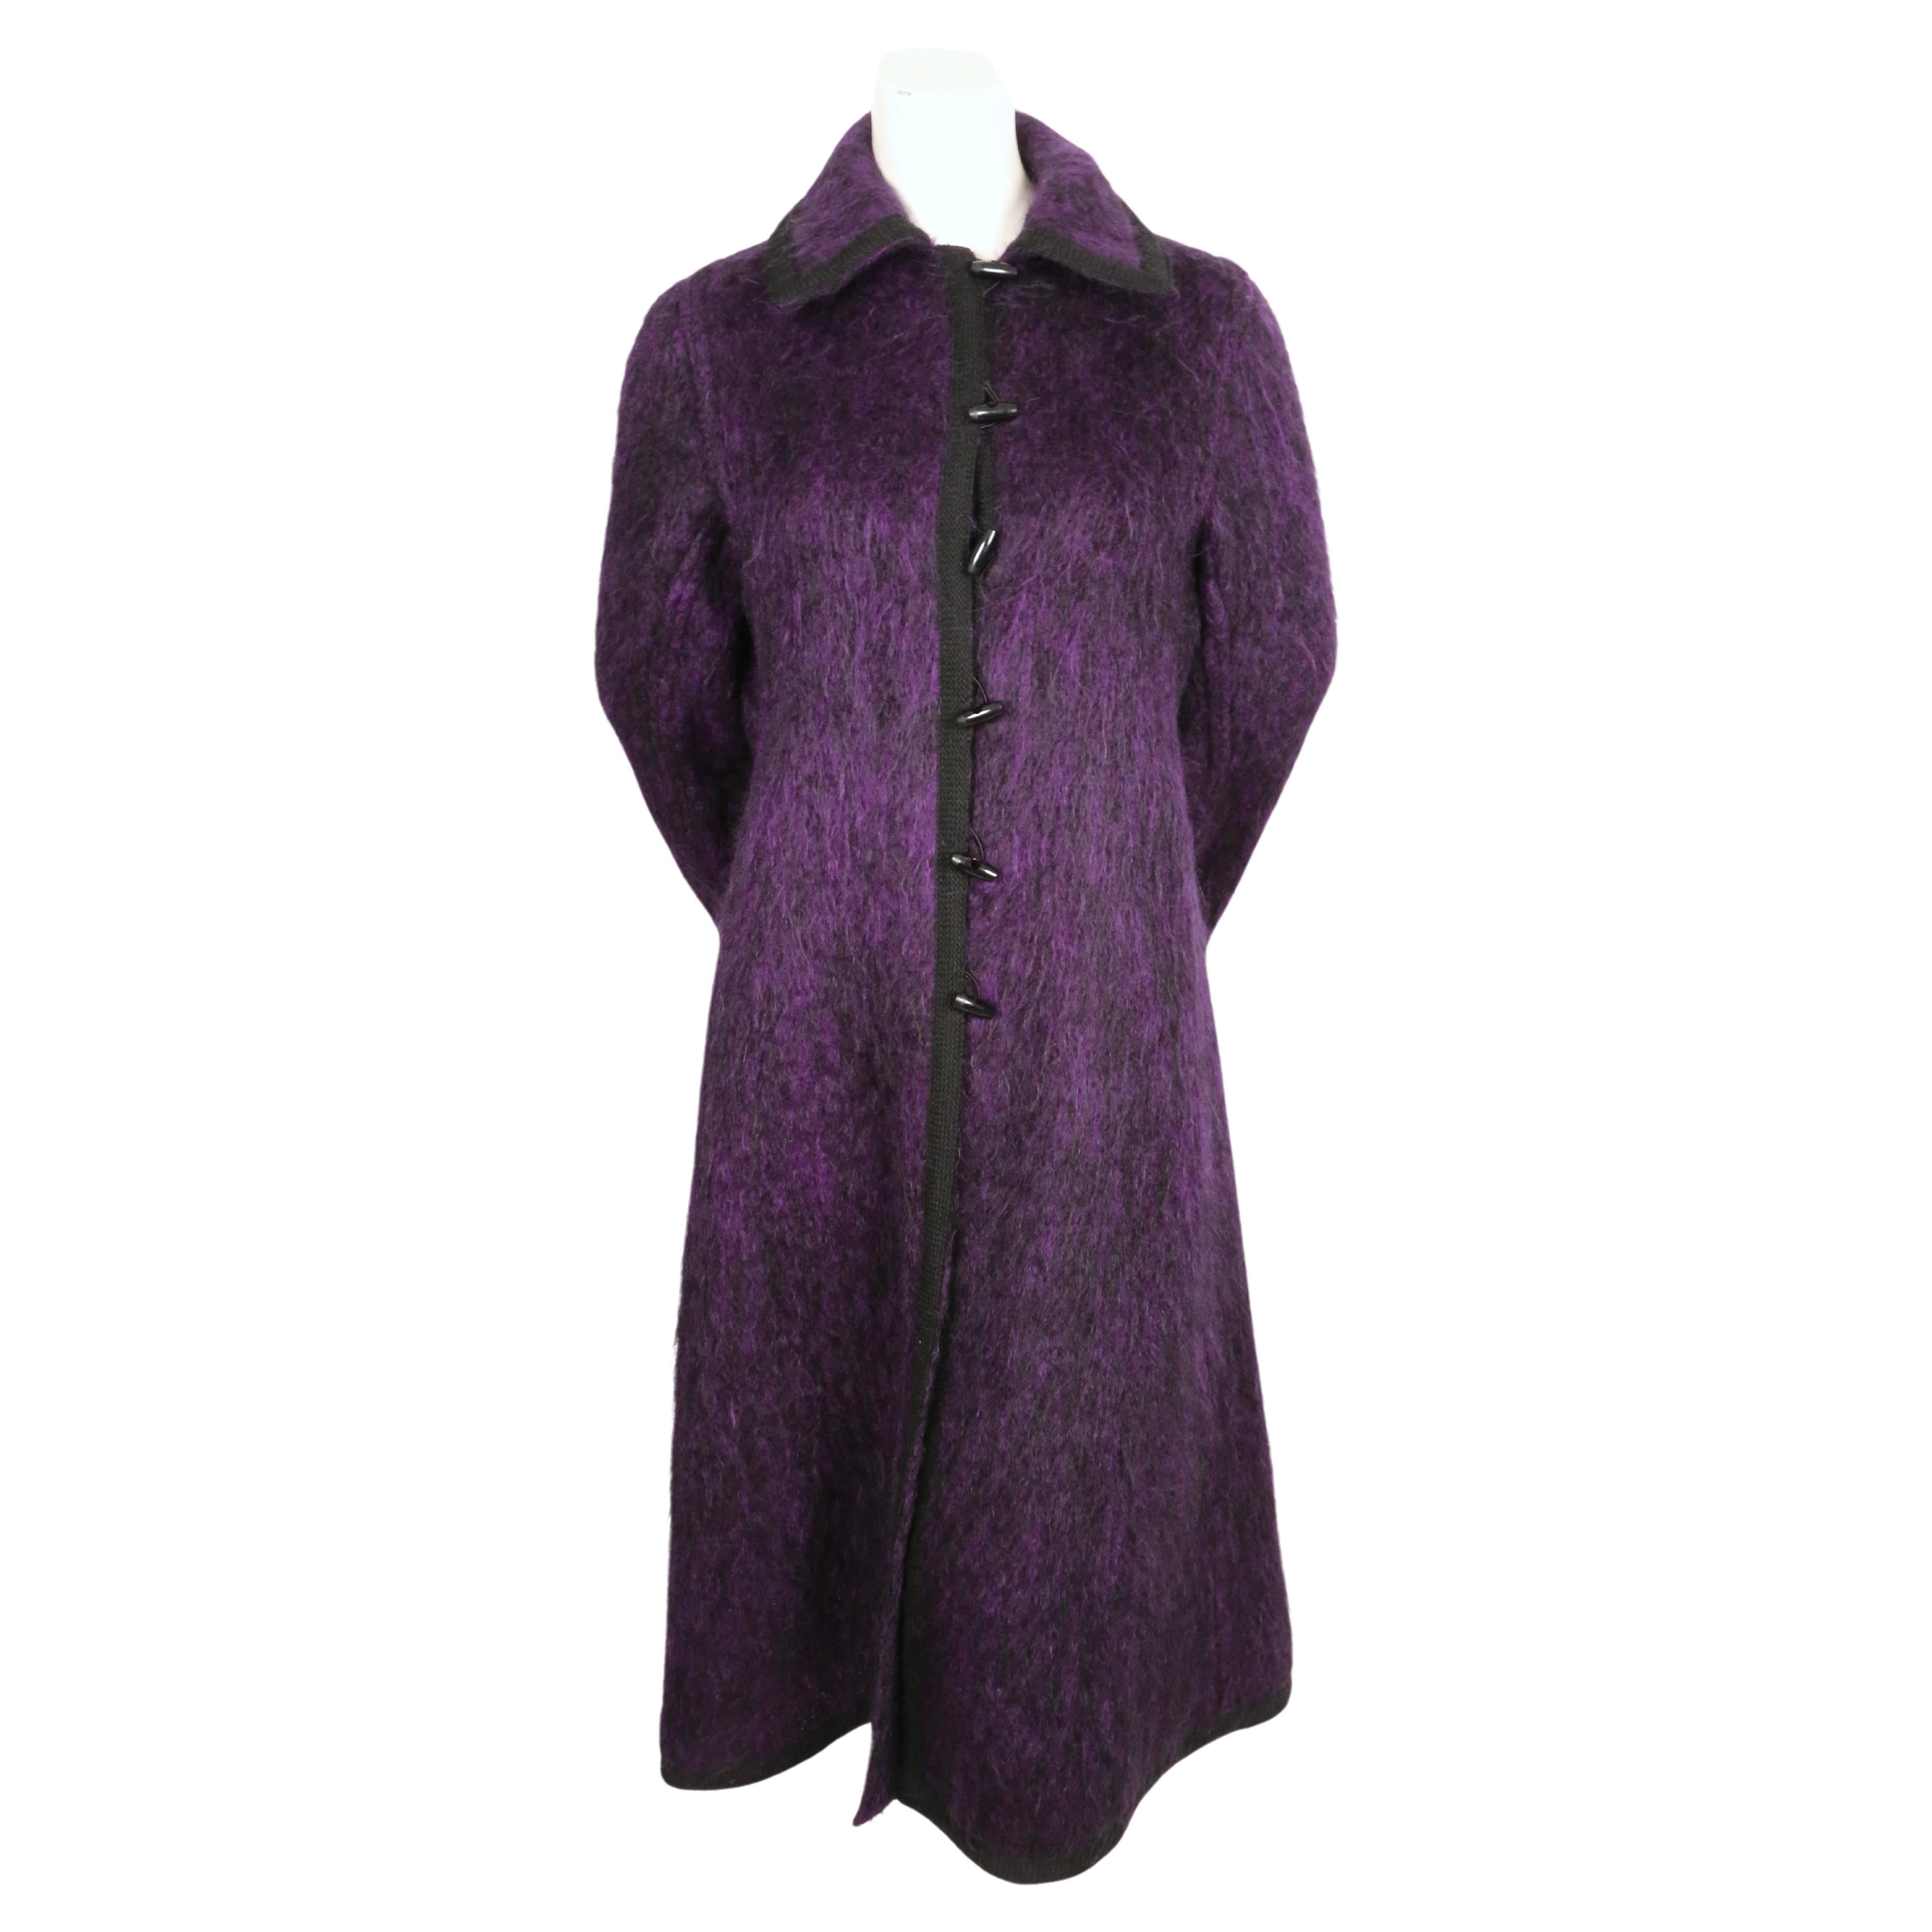 1960's YVES SAINT LAURENT violet purple brushed wool coat with braided trim In Good Condition For Sale In San Fransisco, CA